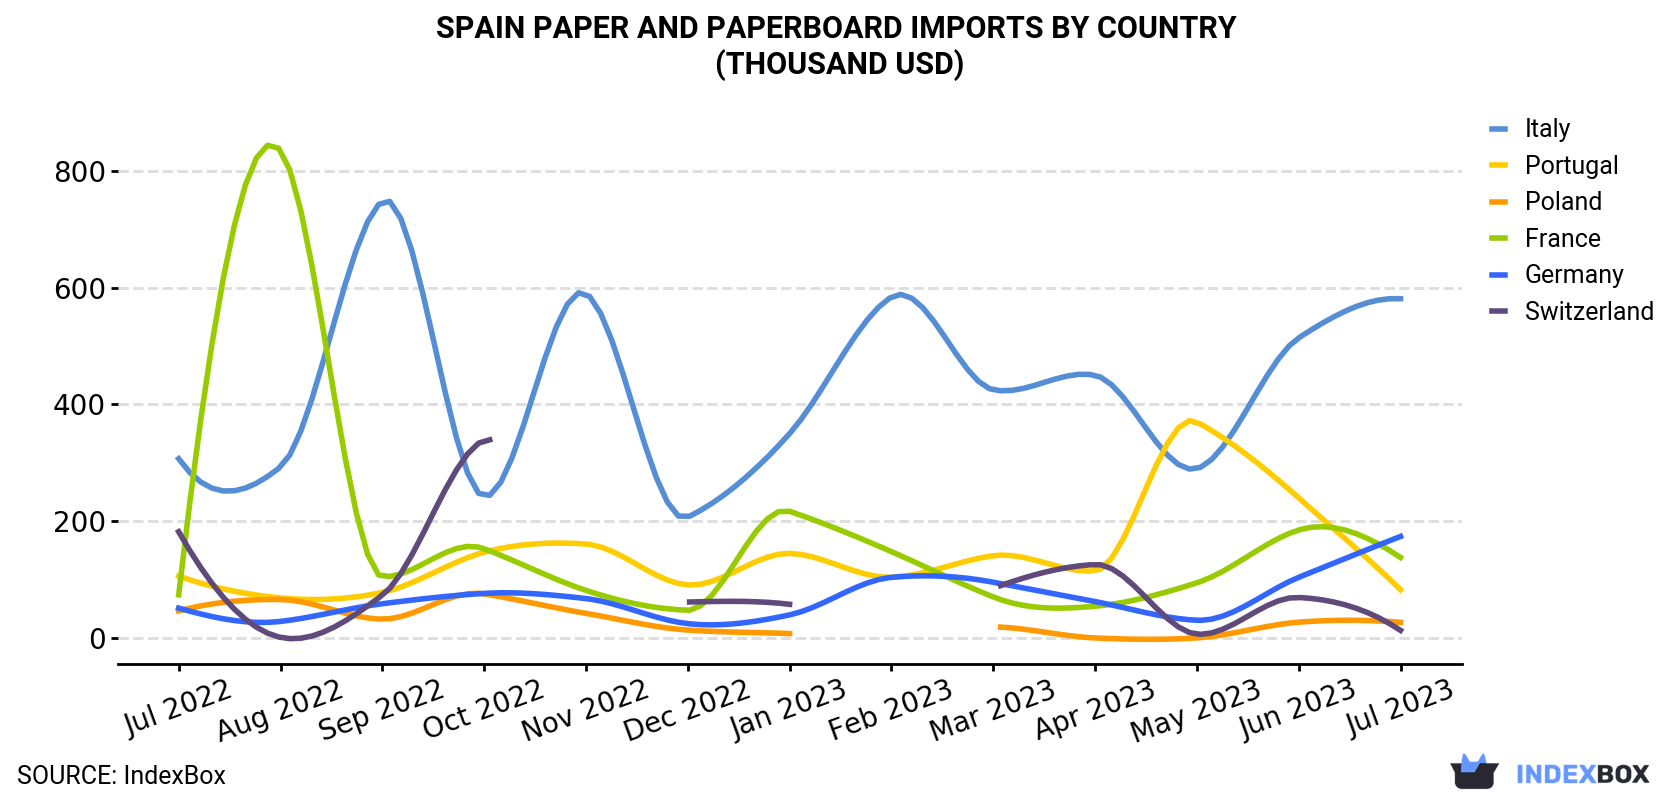 Spain Paper And Paperboard Imports By Country (Thousand USD)